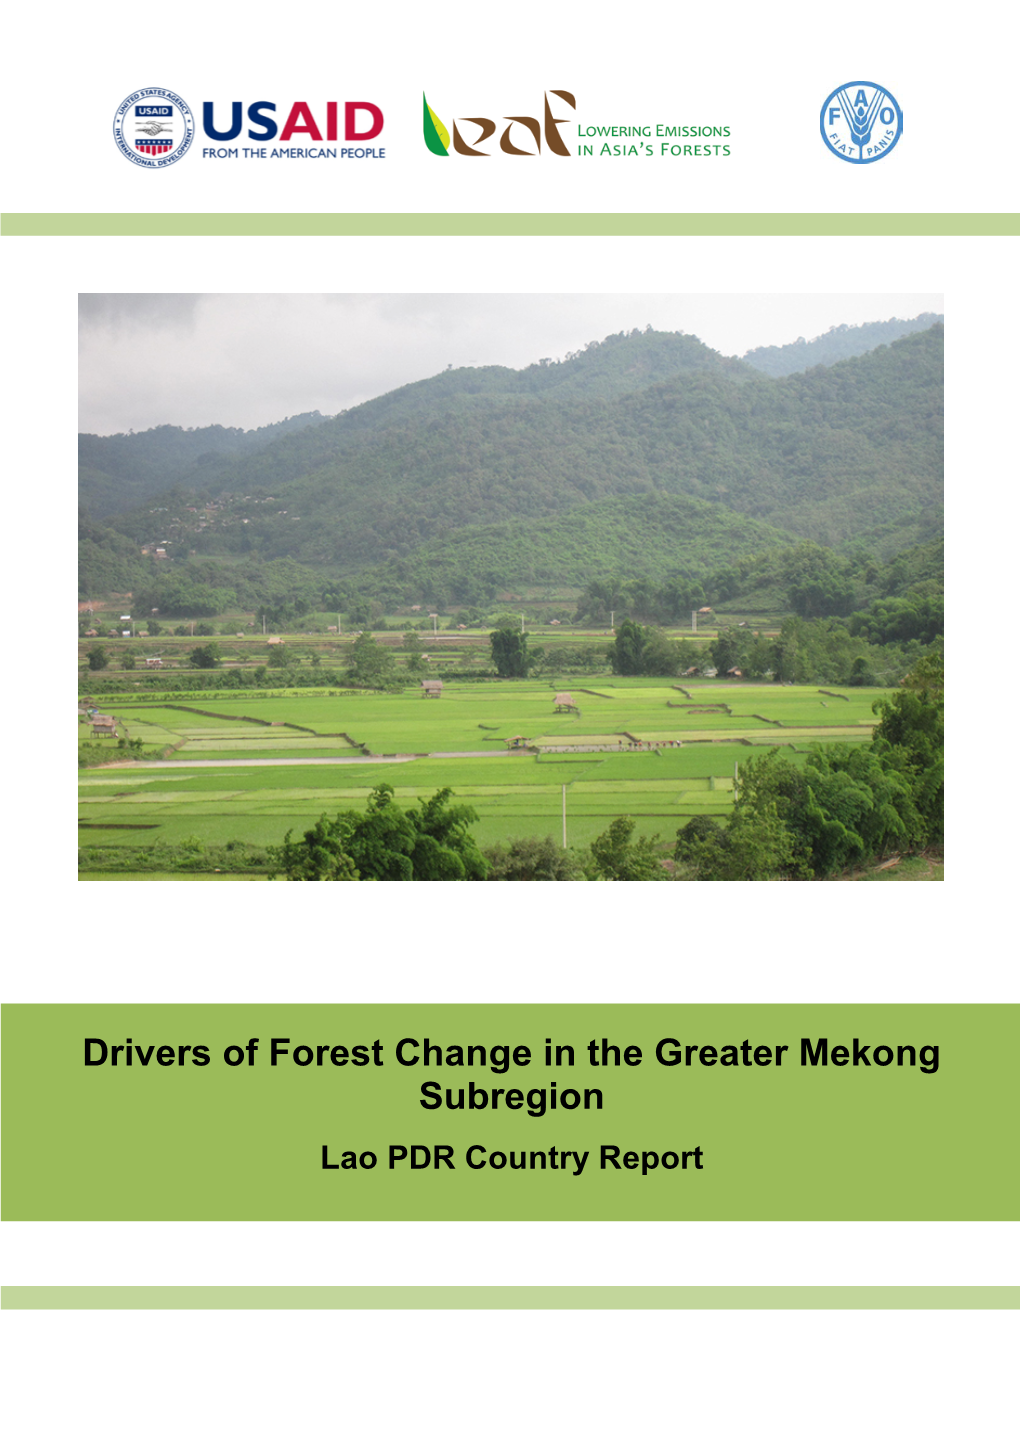 Lao PDR Country Report